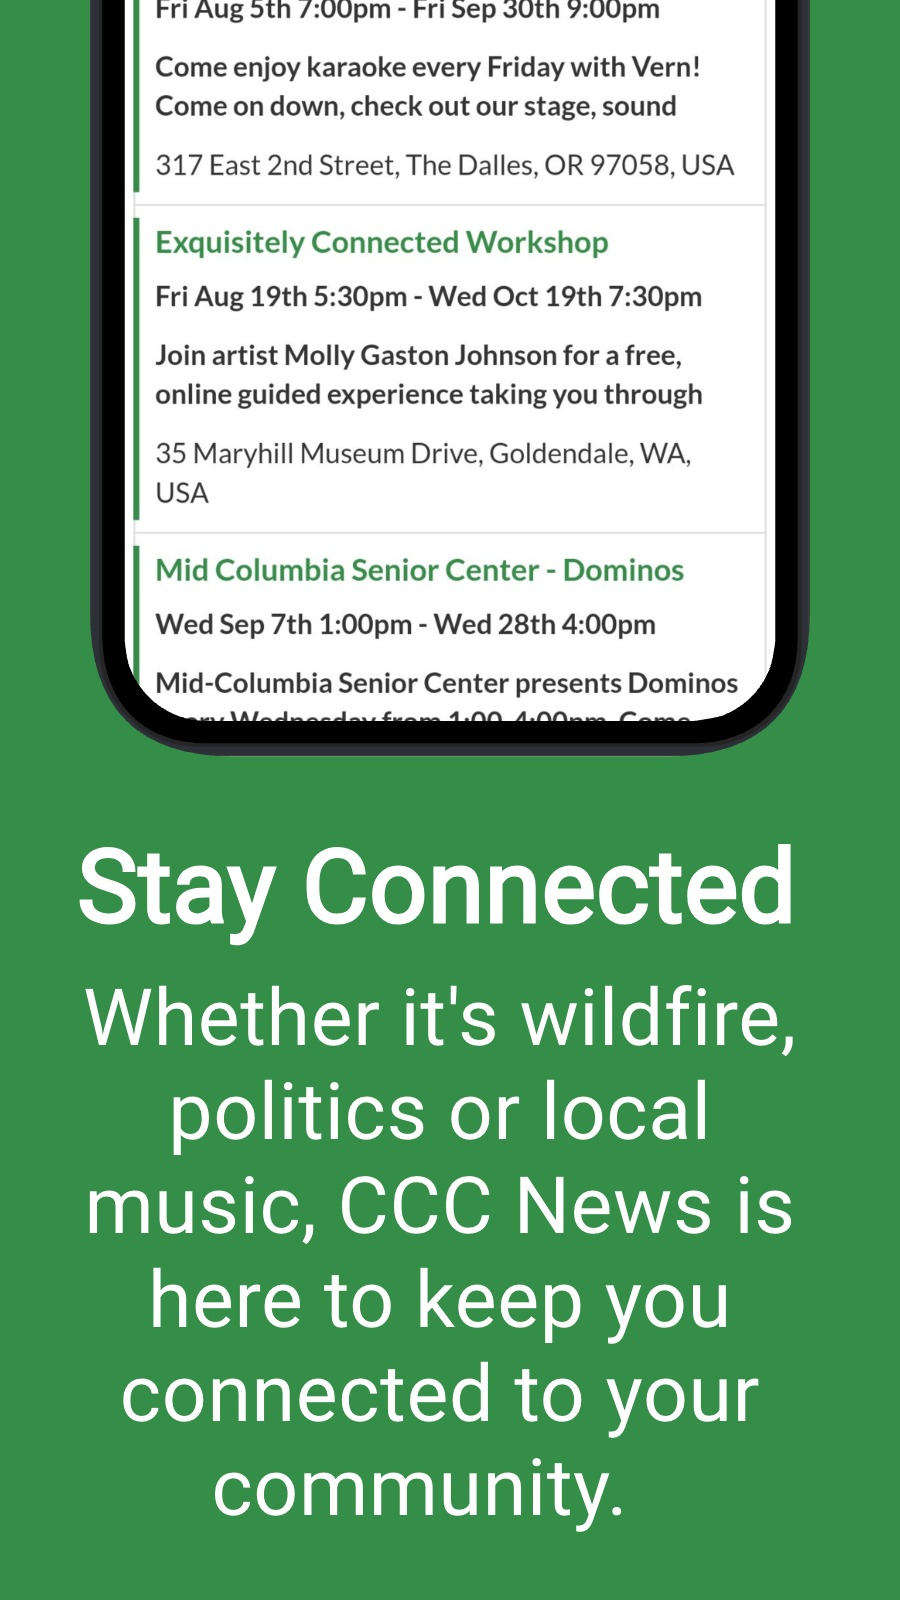 Stay Connected - Whether it's wildfire, politics or local music, CCC News is here to keep you connected to your community.  